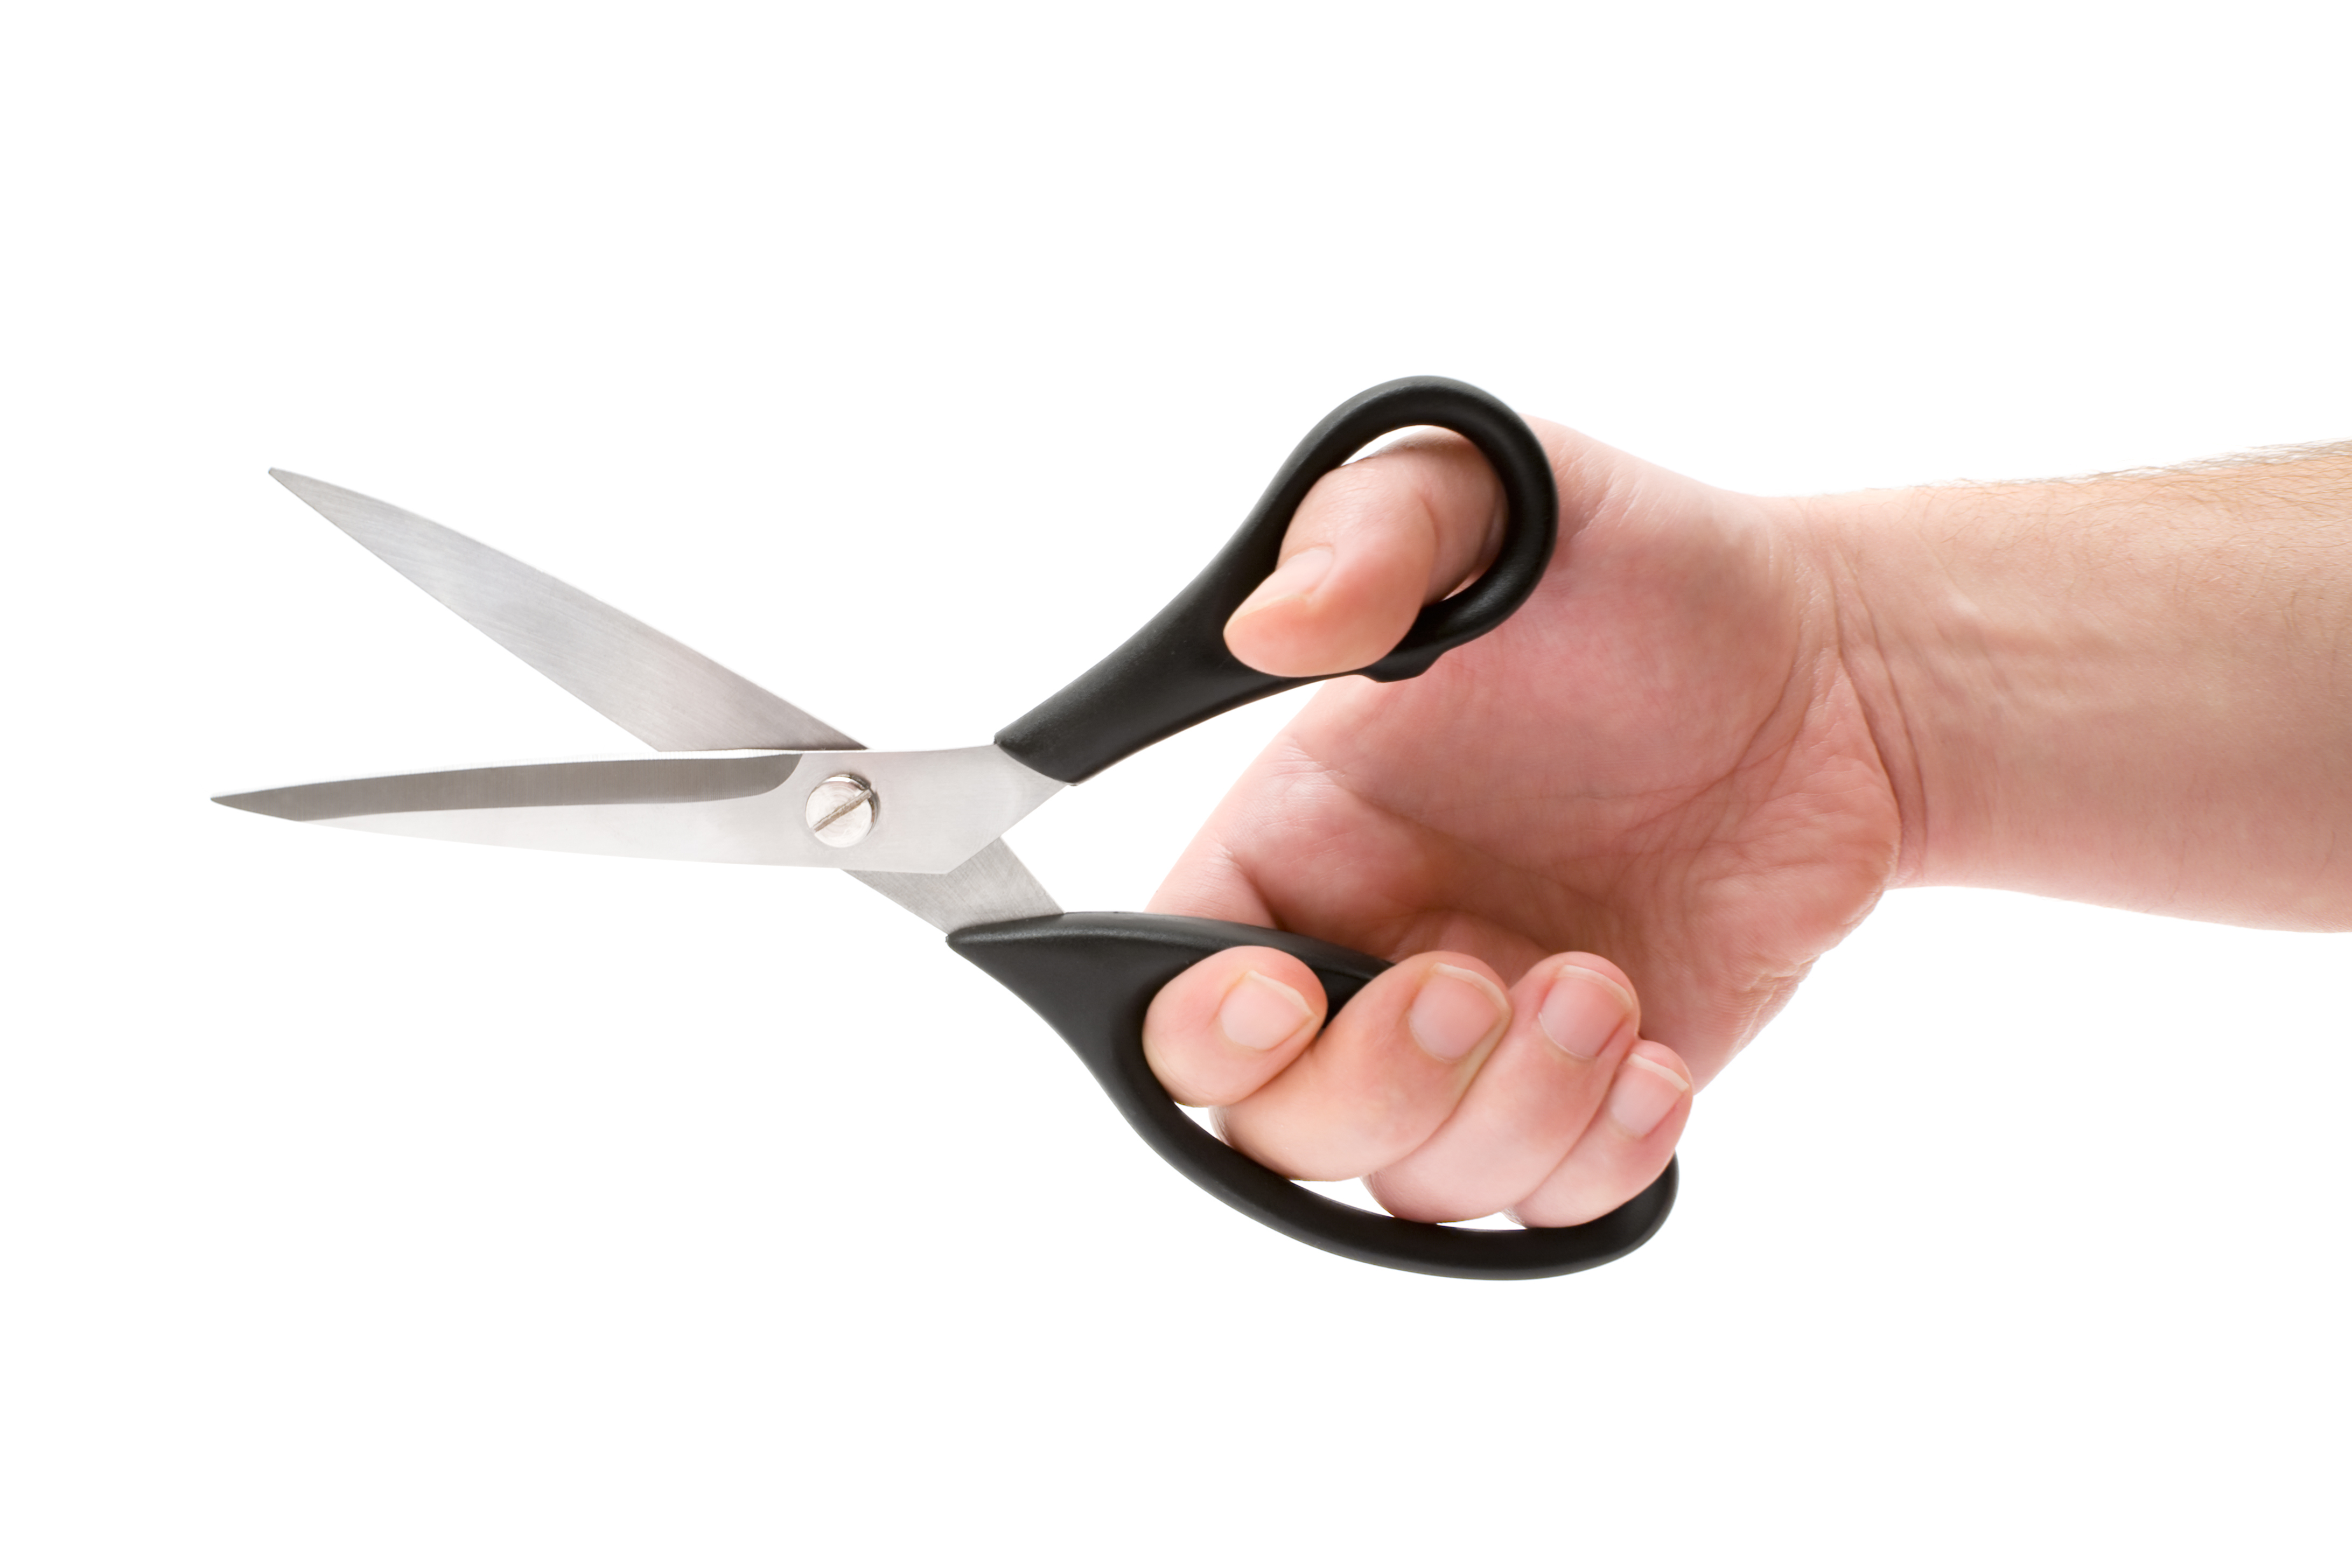 A hand holding scissors | Source: Getty Images